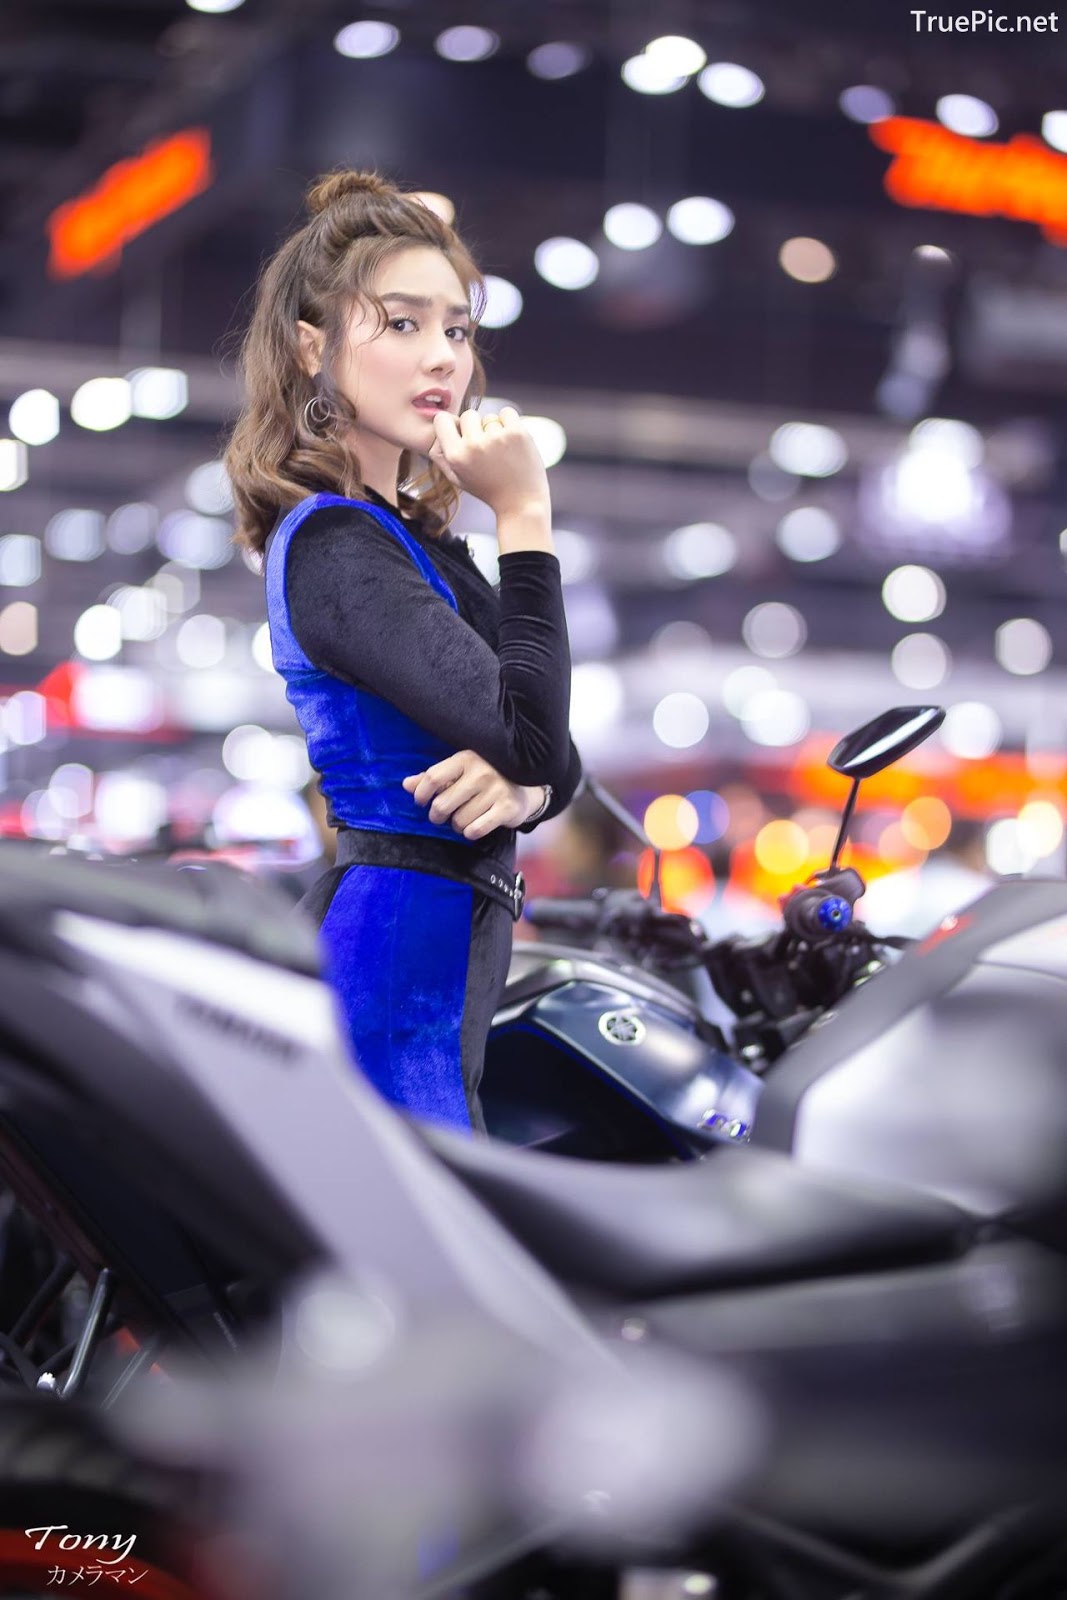 Image-Thailand-Hot-Model-Thai-Racing-Girl-At-Motor-Expo-2018-TruePic.net- Picture-58